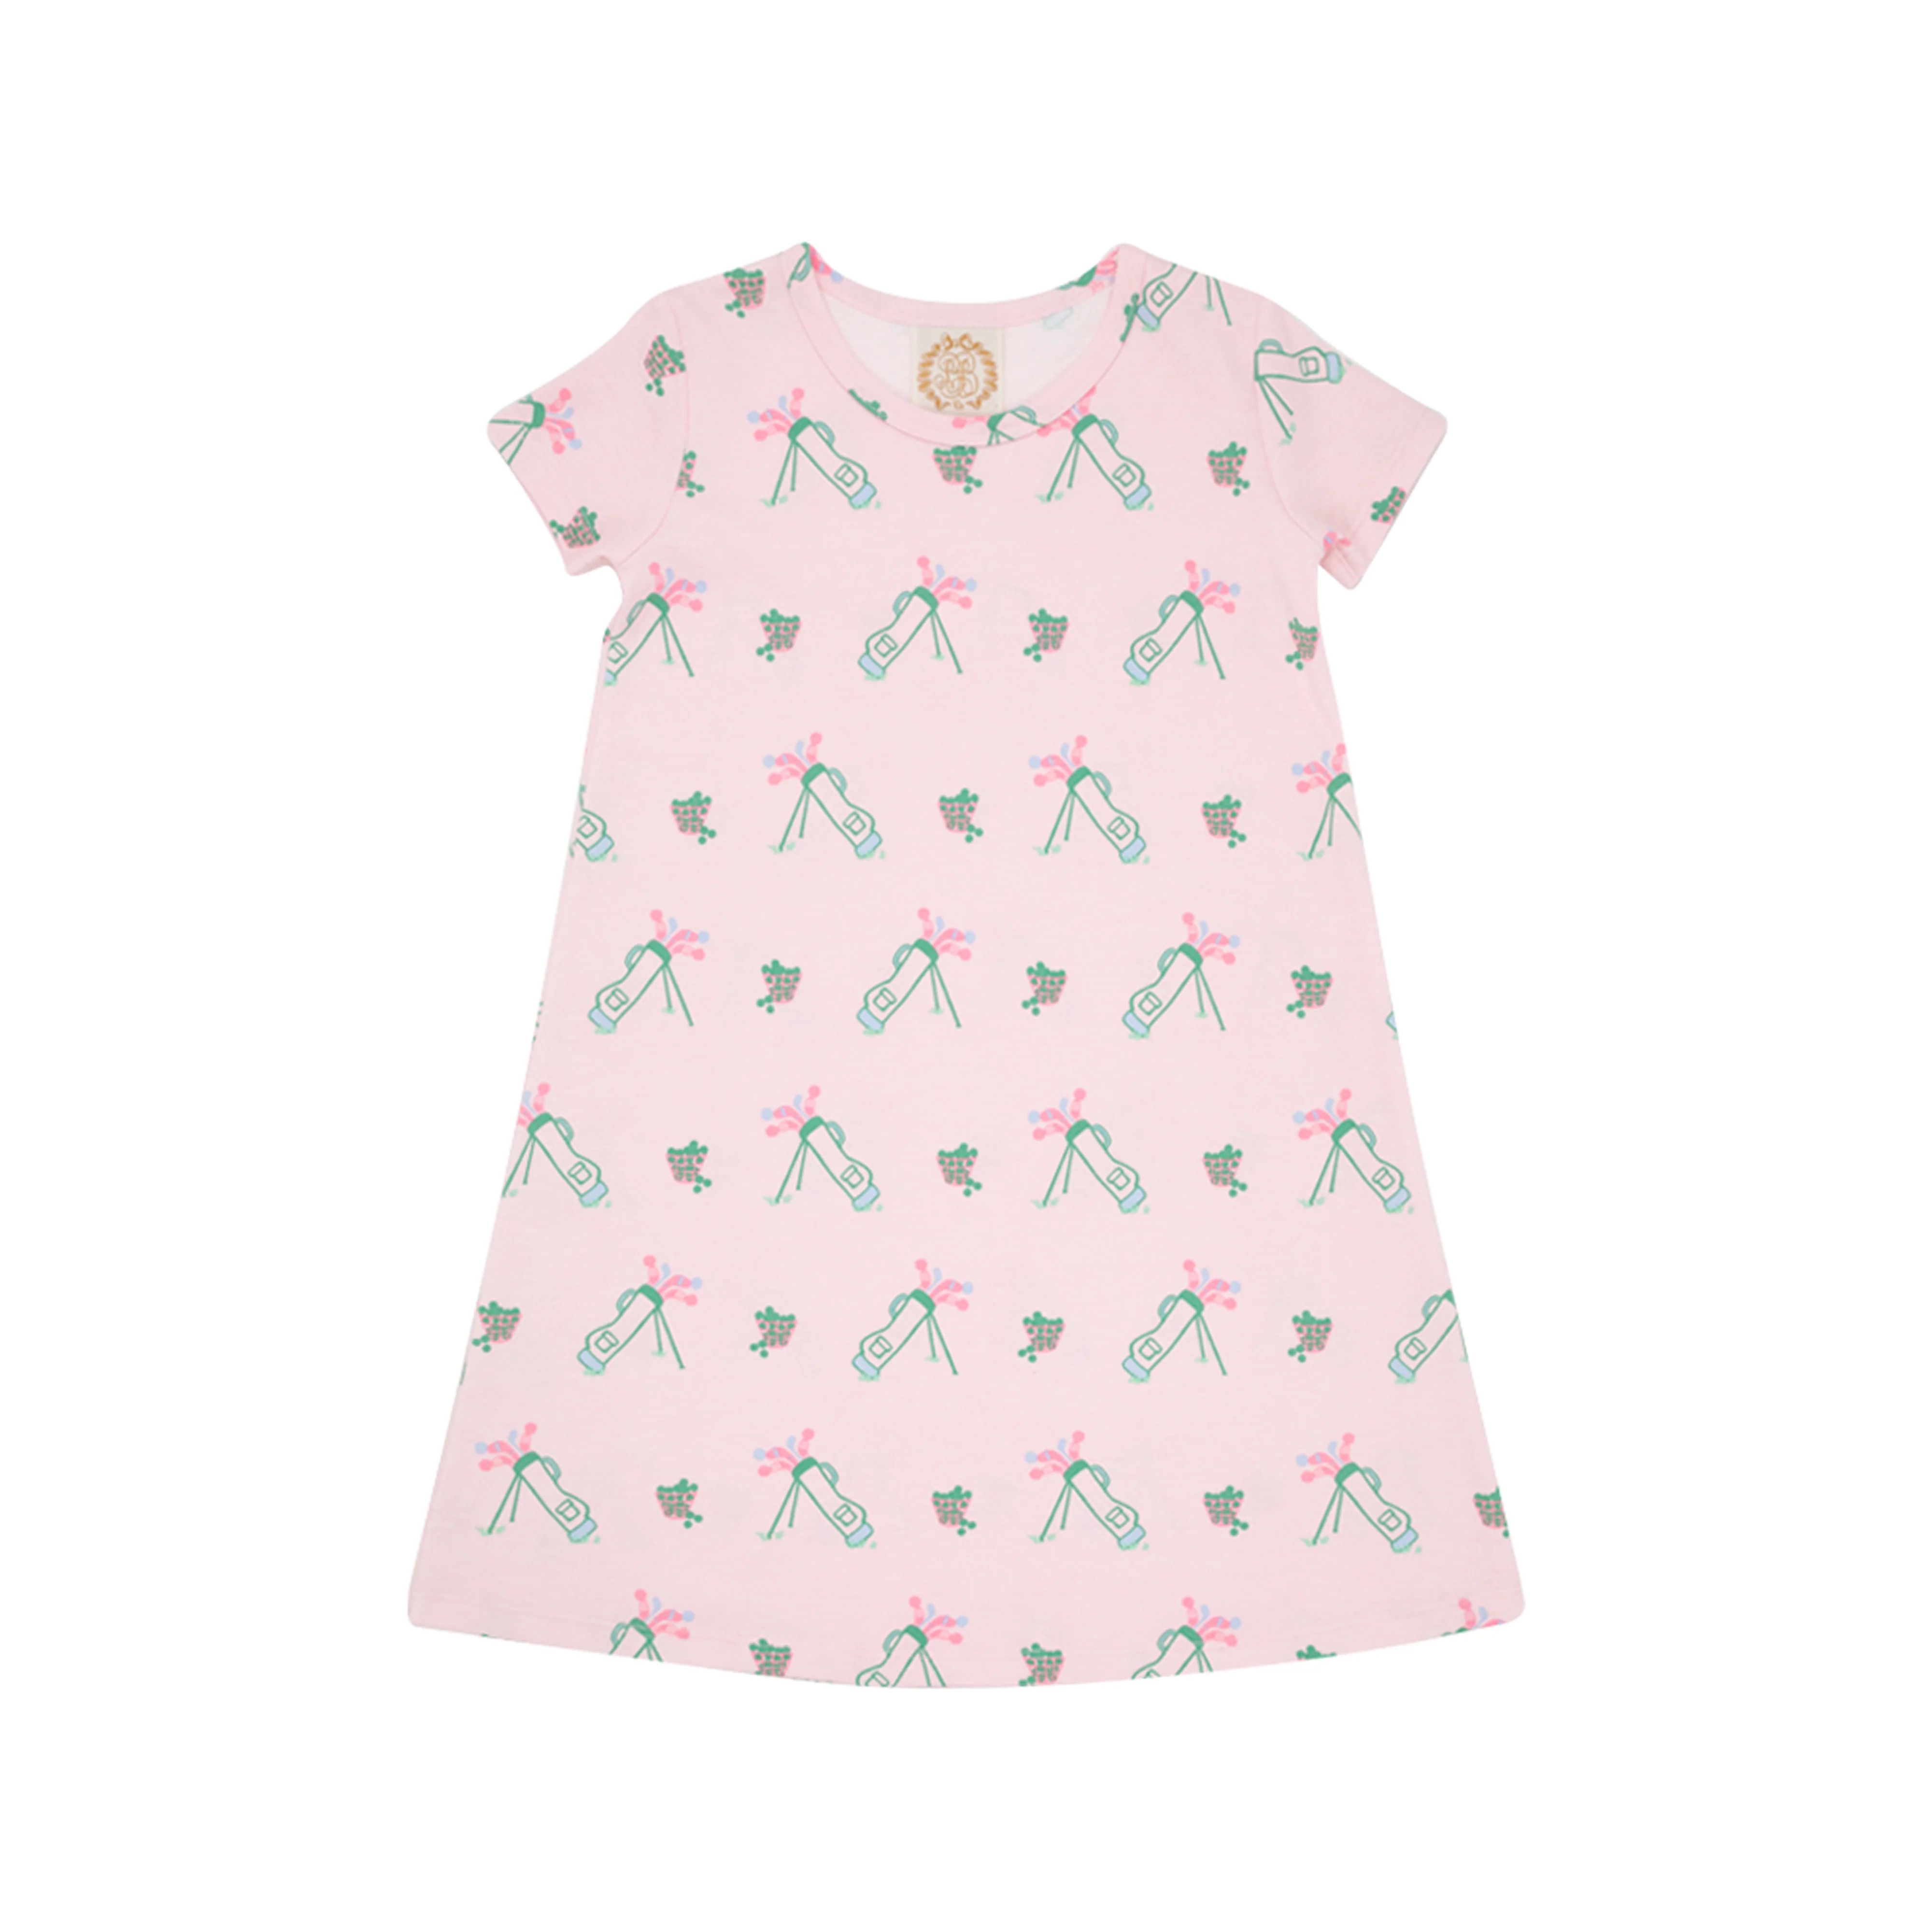 Polly Play Dress - The Best By Par | The Beaufort Bonnet Company